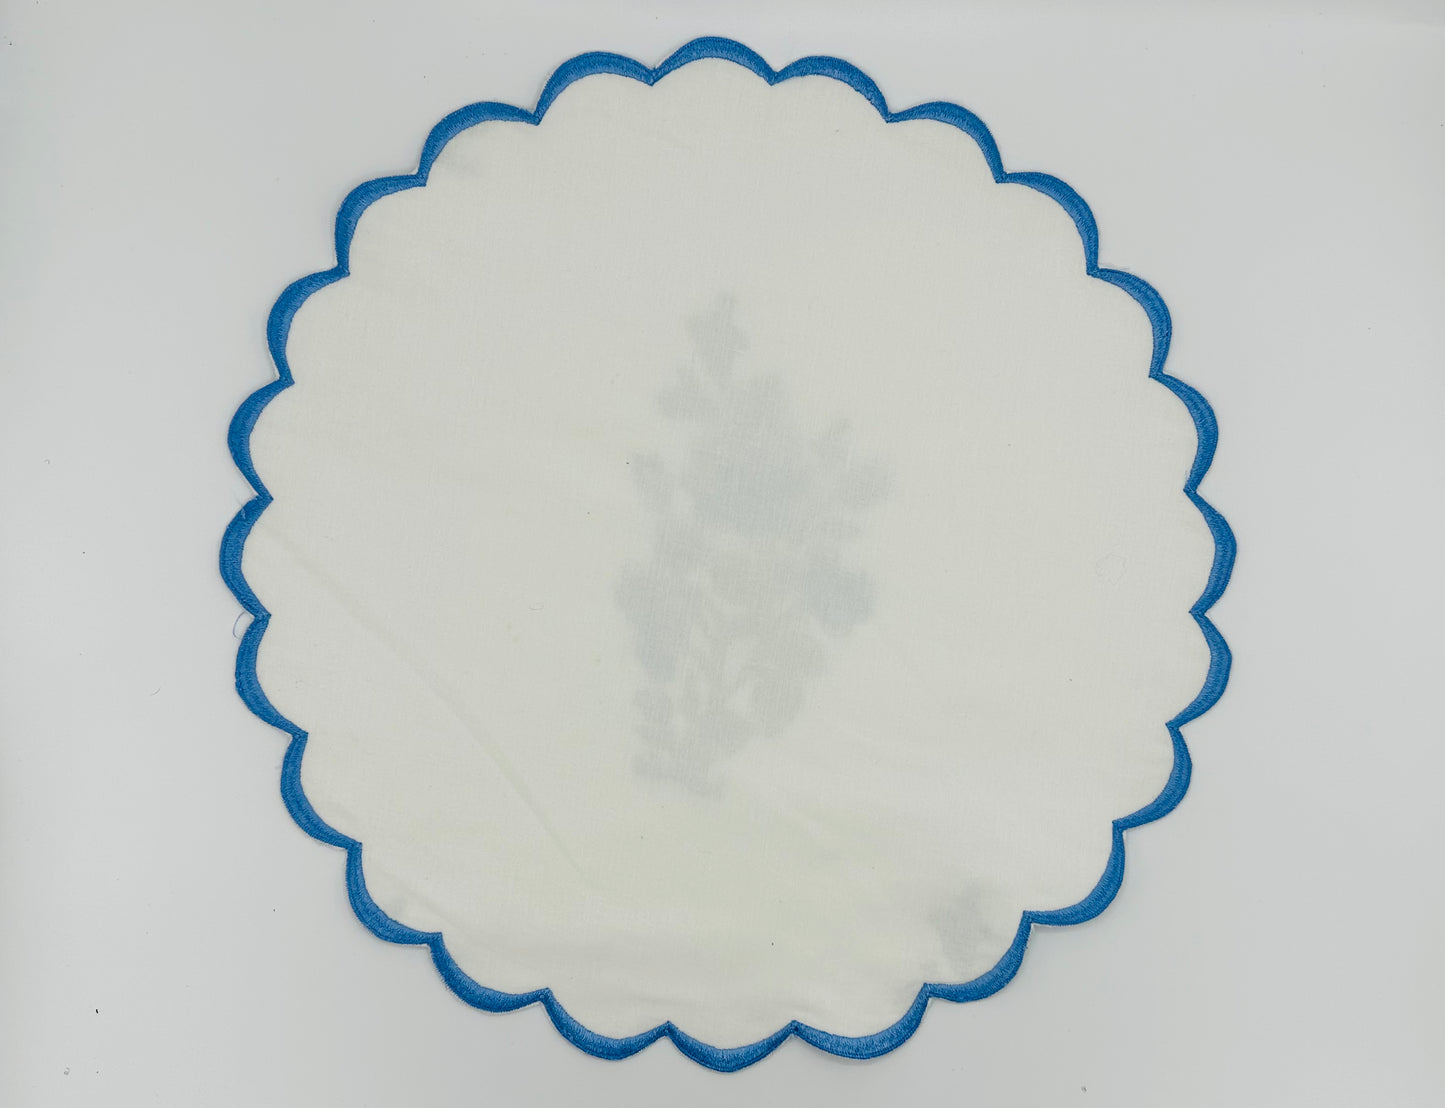 Set of 4 I Blue & White Floral Round Scalloped Edge Embroidered Placemat I Table Mats I Cotton Placemat I Table Linen I Tablecloth - DharBazaar